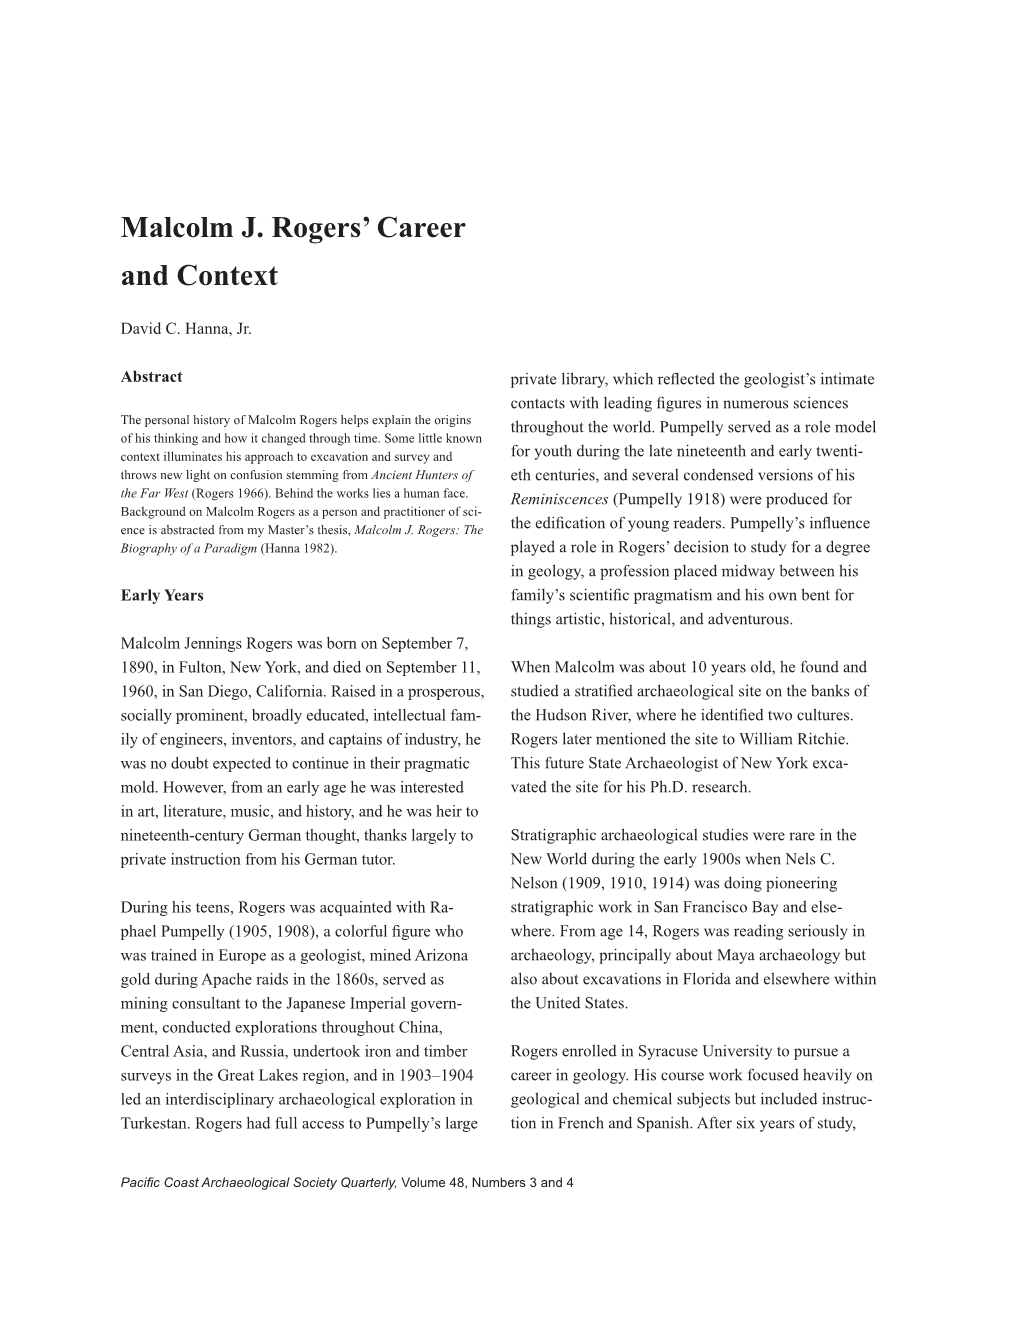 Malcolm J. Rogers' Career and Context